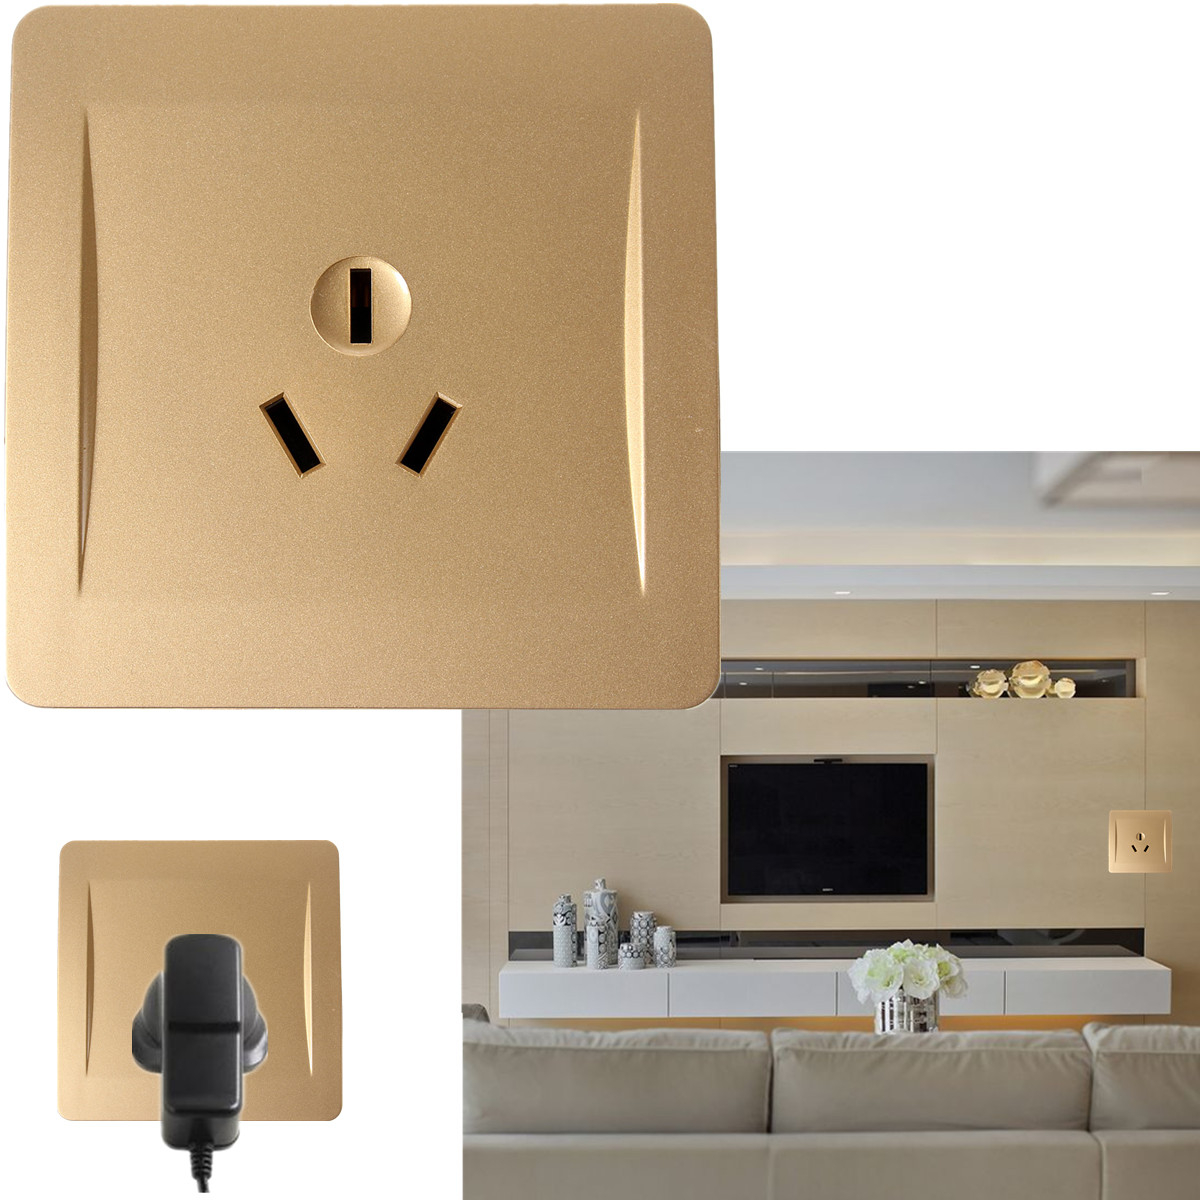 AC110-250V-Electric-Wall-Charger-Switch-Socket-Adapter-Power-Outlet-Panel-Faceplate-AU-Plug-1280814-2